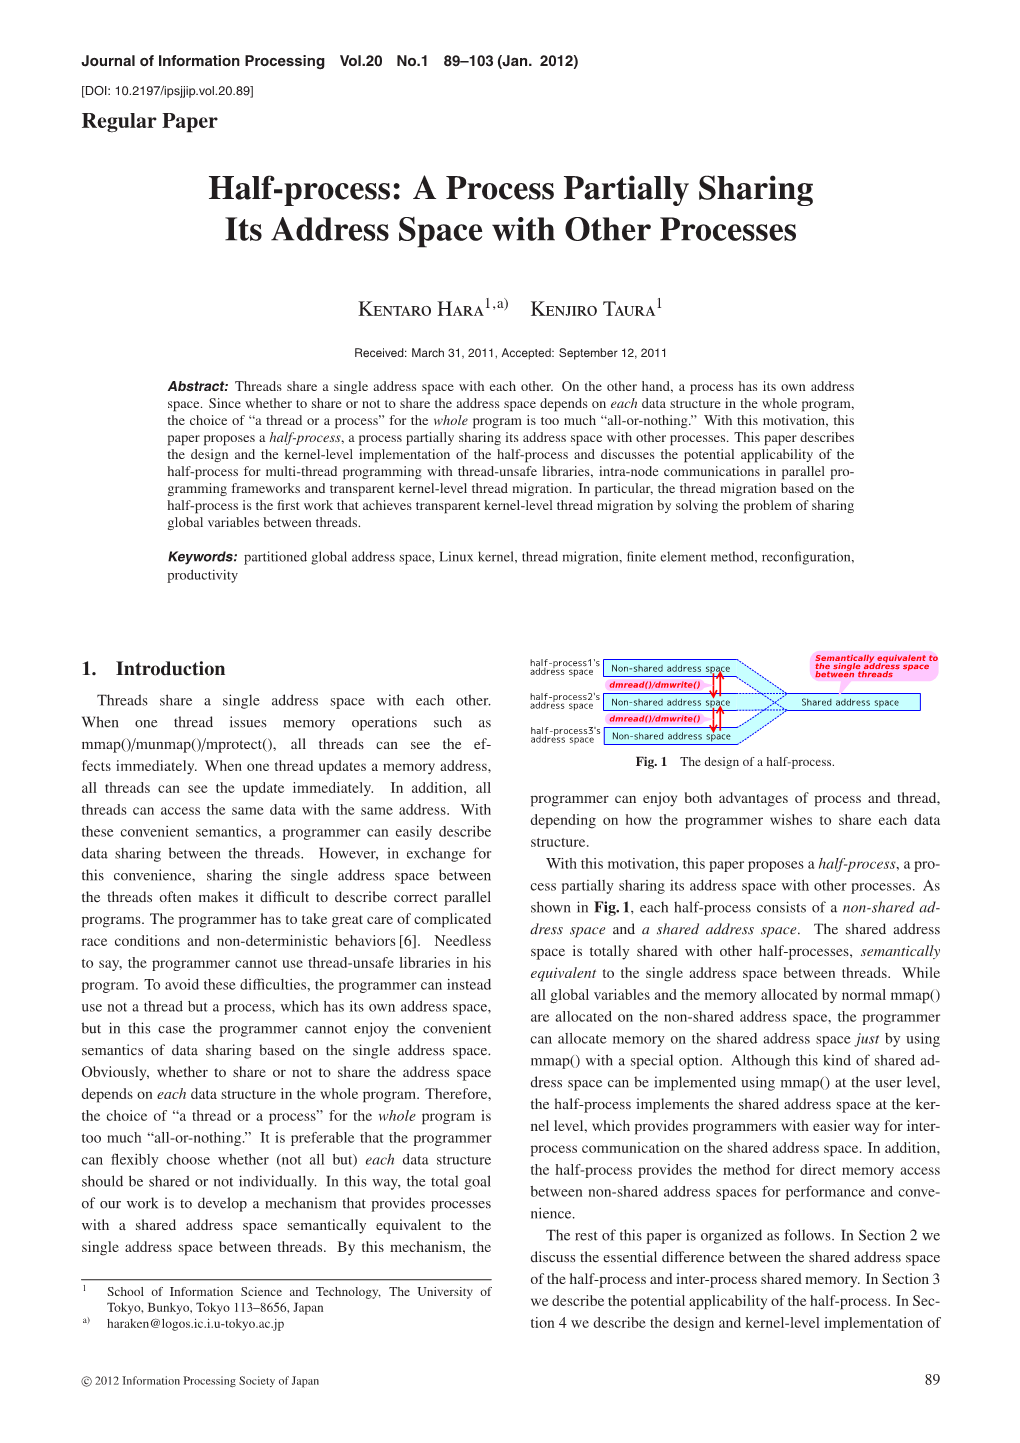 A Process Partially Sharing Its Address Space with Other Processes